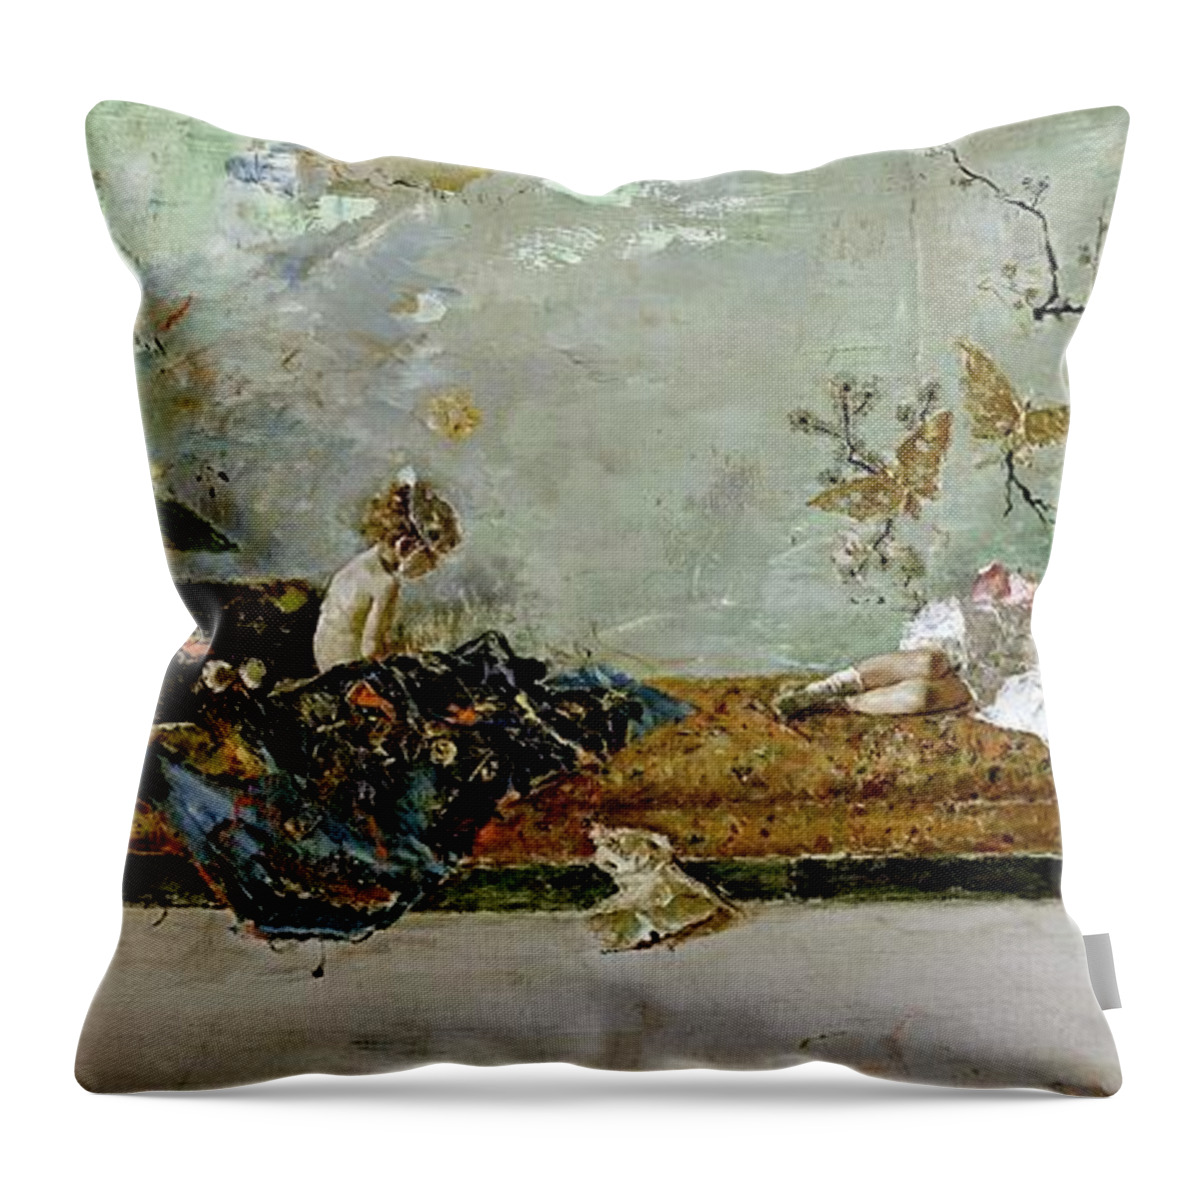 Maria Fortuny Throw Pillow featuring the painting Mariano Fortuny Marsal 'The painter's children, Maria Luisa and Mariano, in the Japanese Room',1874. by Mariano Fortuny y Marsal -1838-1874-